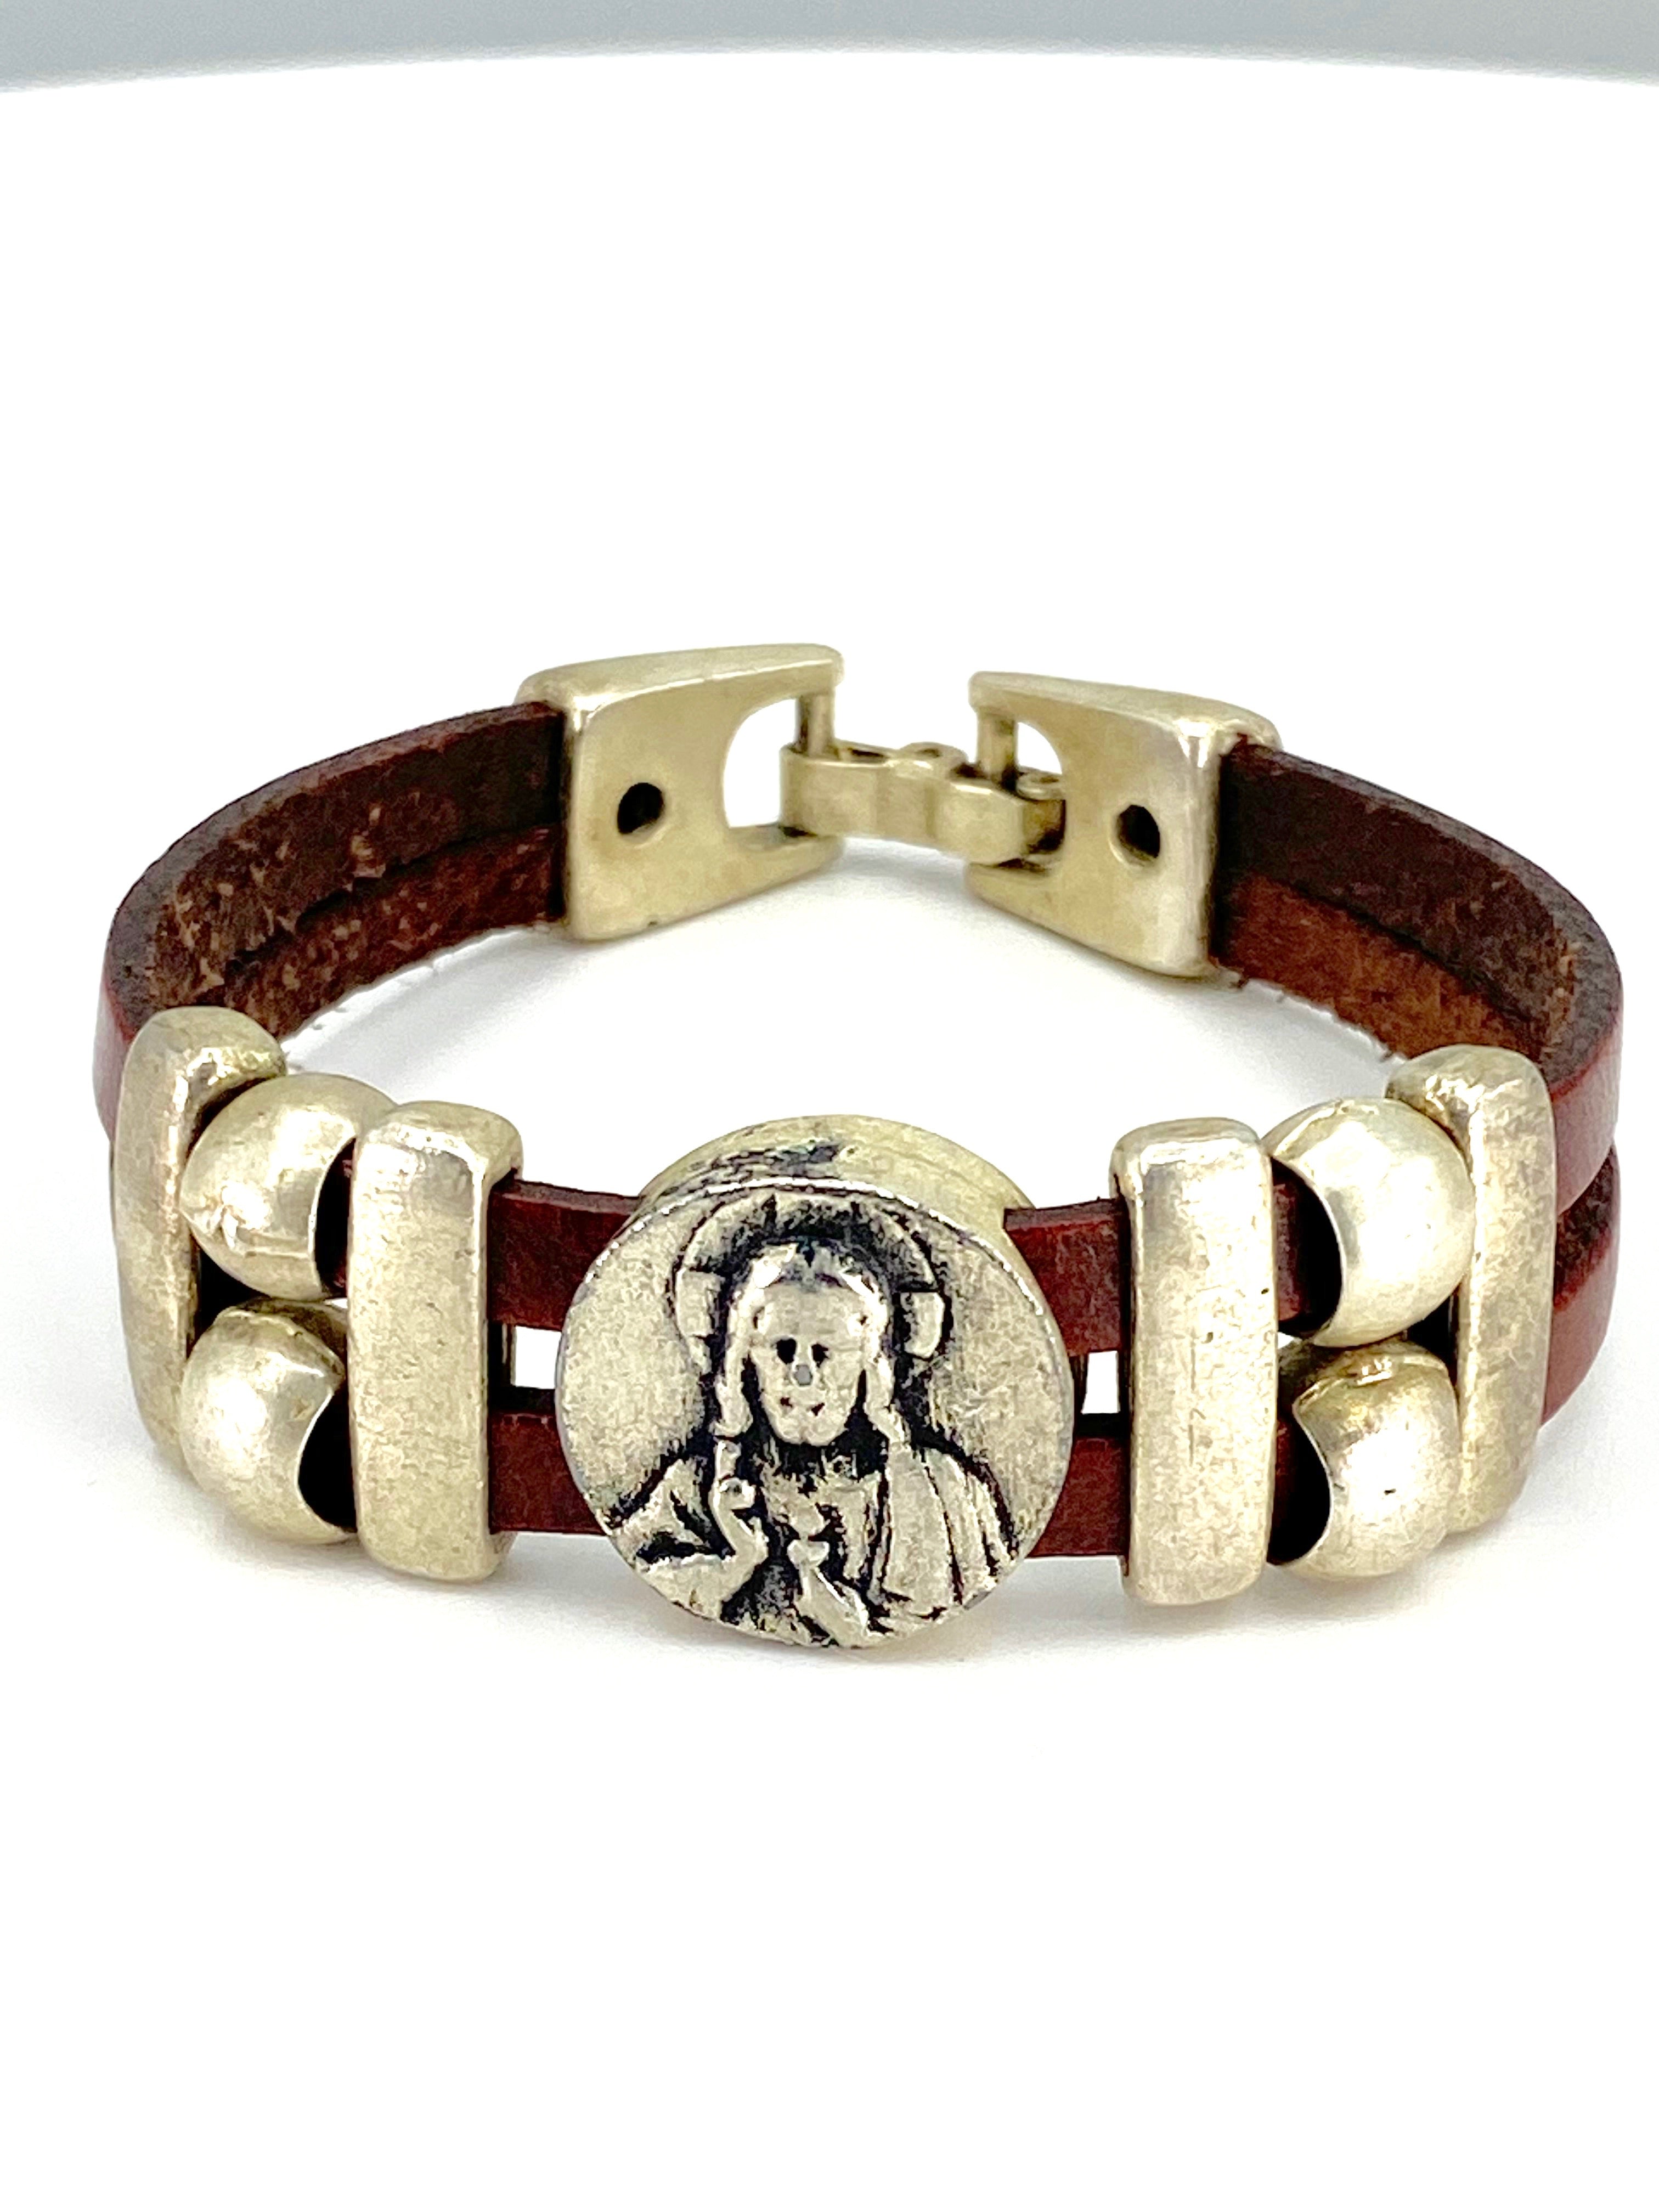 Vintage Sacred Heart bracelet handmade jewelry with Genuine Double Leather straps by Graciela's Collection